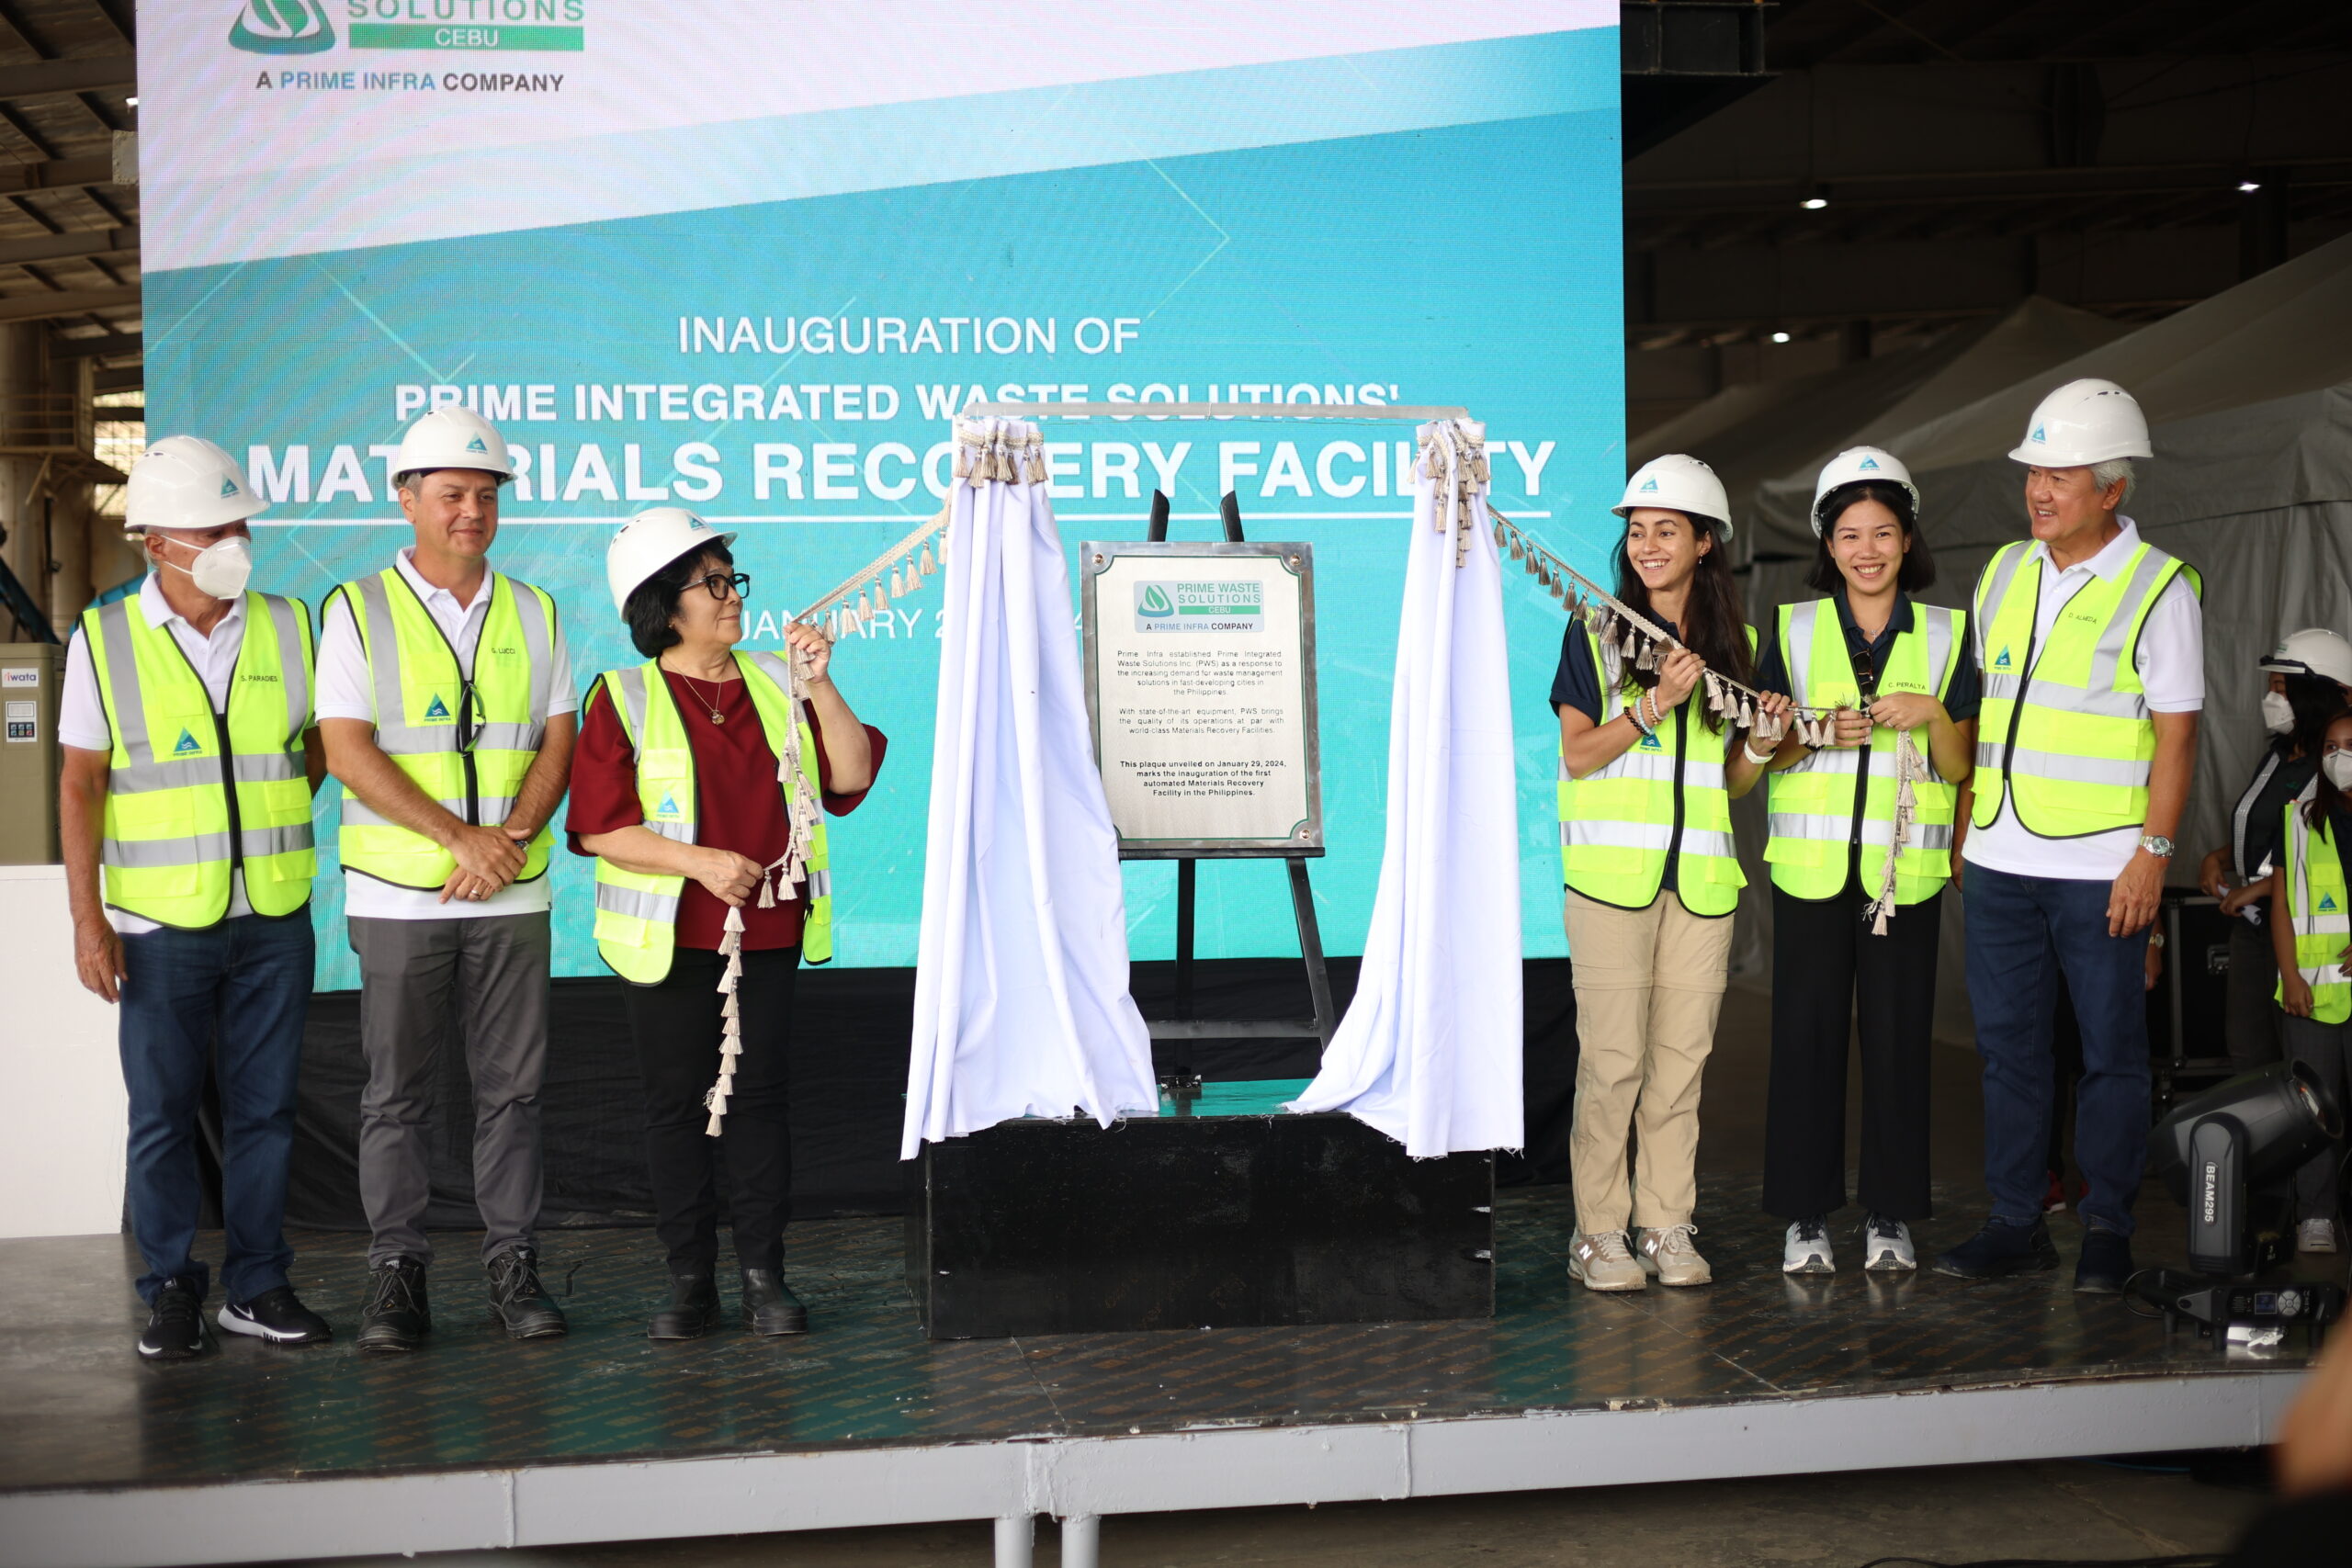 L-R: Director Steve Paradies and President and CEO Guillaume Lucci of Prime Infra, DENR Secretary Ma. Antonia Yulo-Loyzaga, PWS Chair Katrina Razon, and Market Sector Lead for Waste Cara Peralta and Donato Almeda of Prime Infra unveil the plaque at the inauguration of Prime Integrated Waste Solutions’ first Materials Recovery Facility in Cebu.